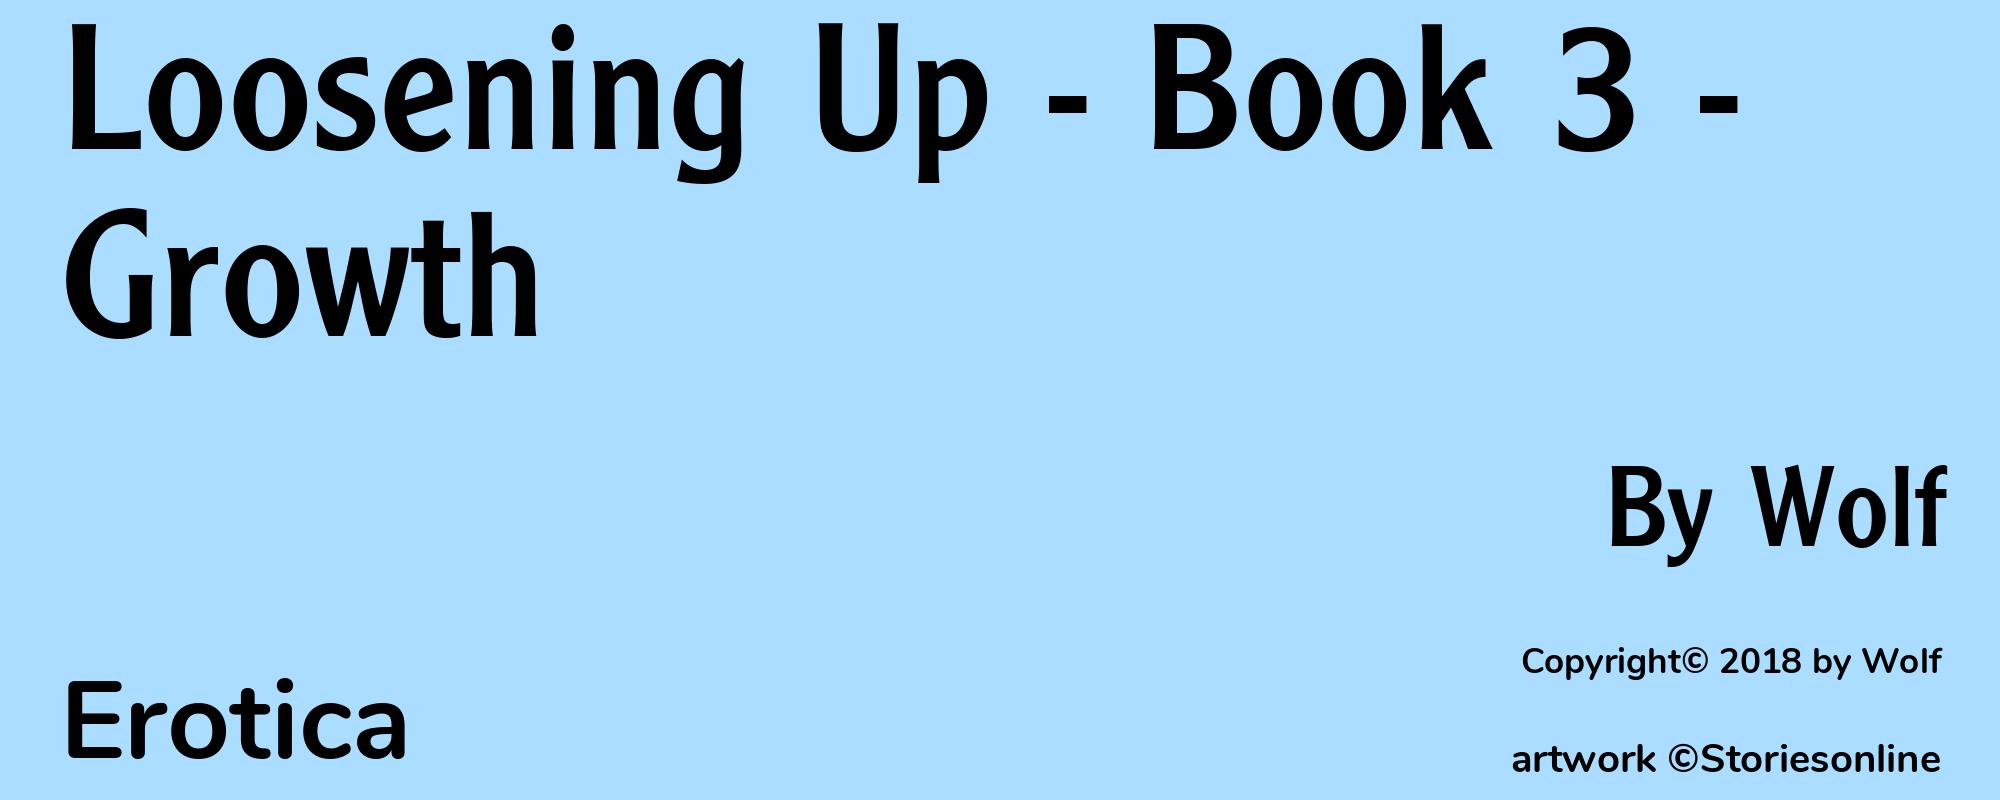 Loosening Up - Book 3 - Growth - Cover